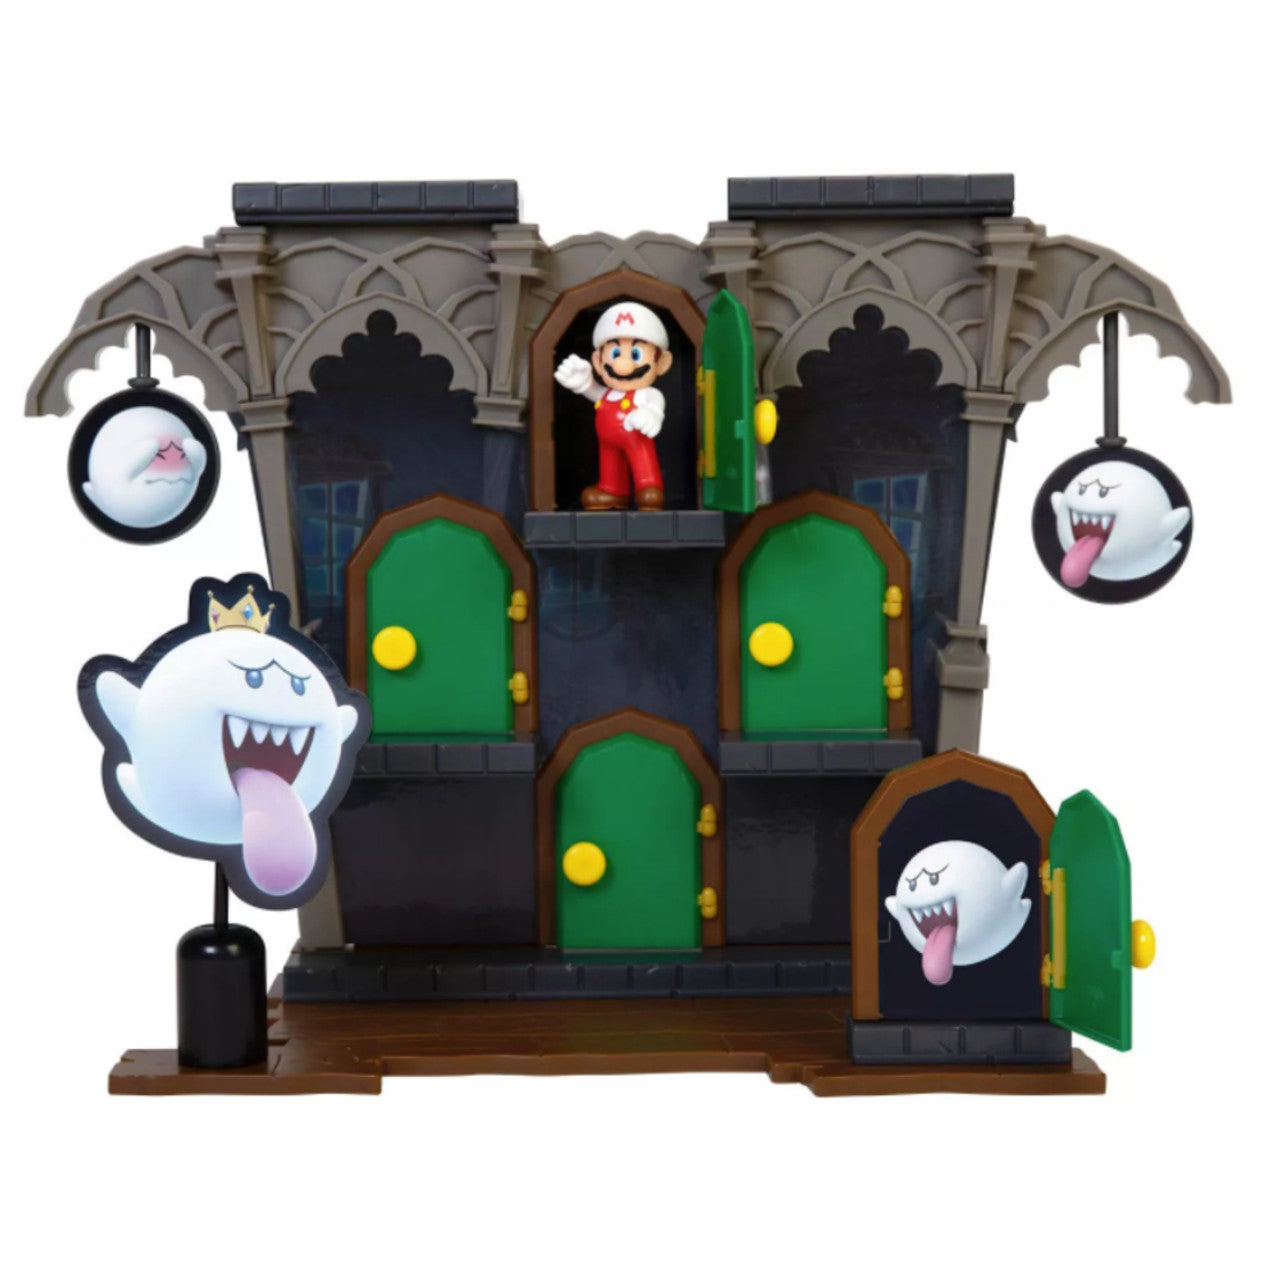 World of Nintendo 2.5" Figure Playset Deluxe - Boo Mansion